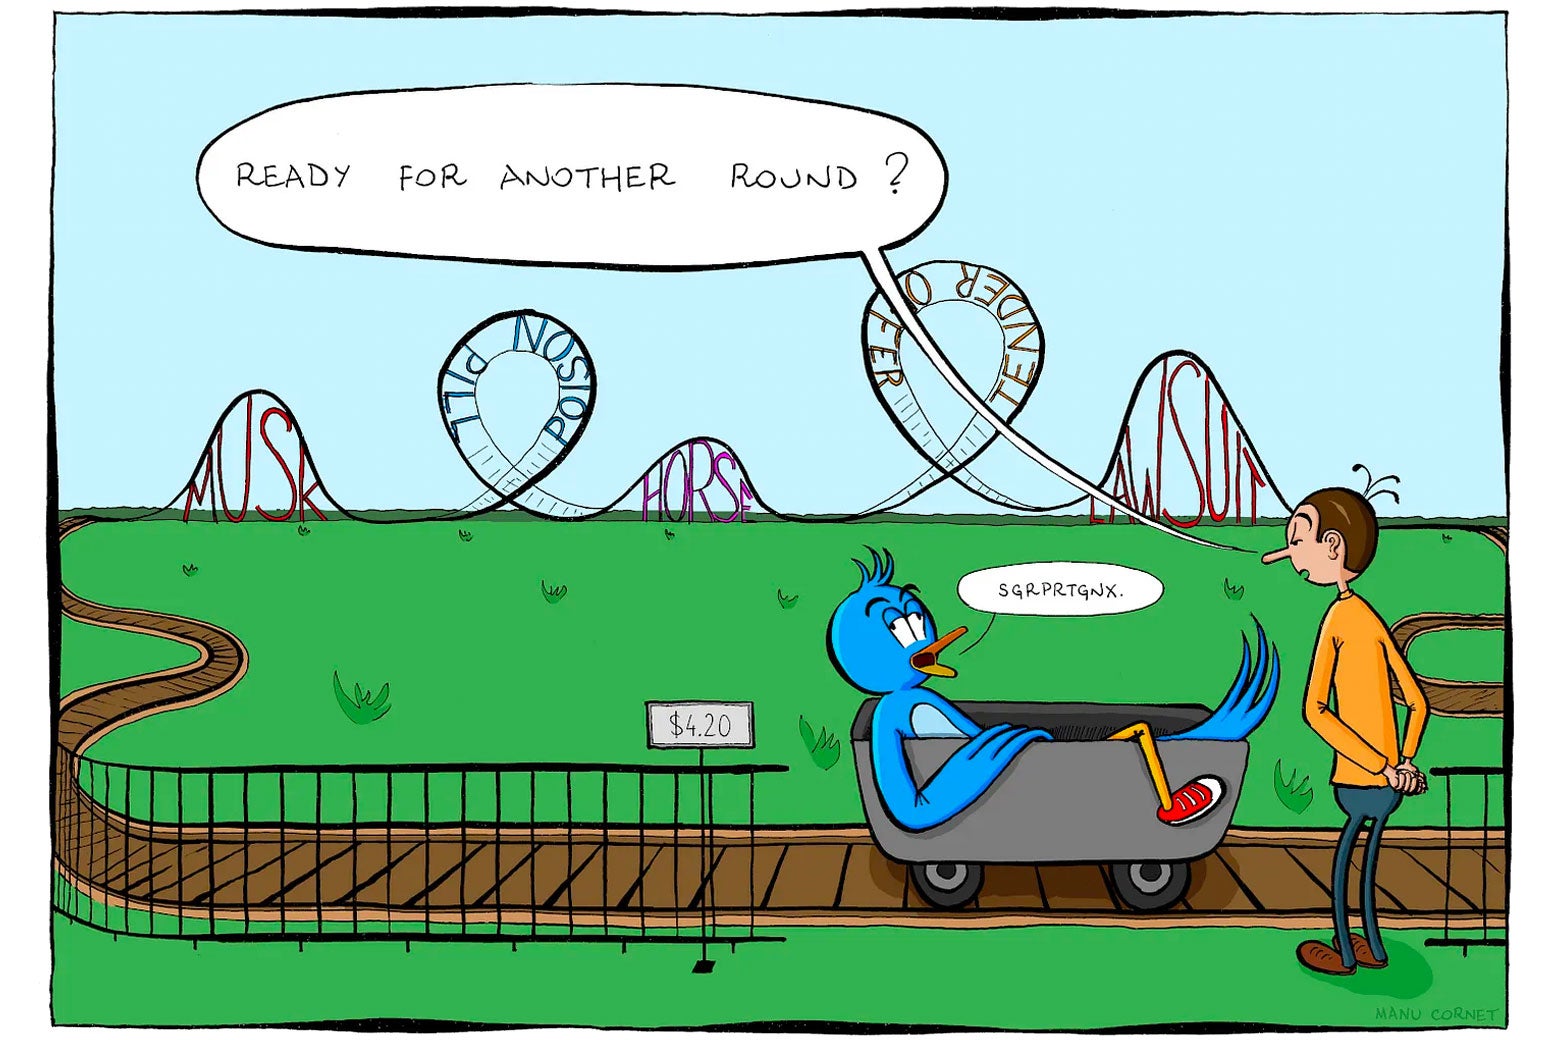 The Twitter bird is feeling dizzy and has just gone on a roller coaster.